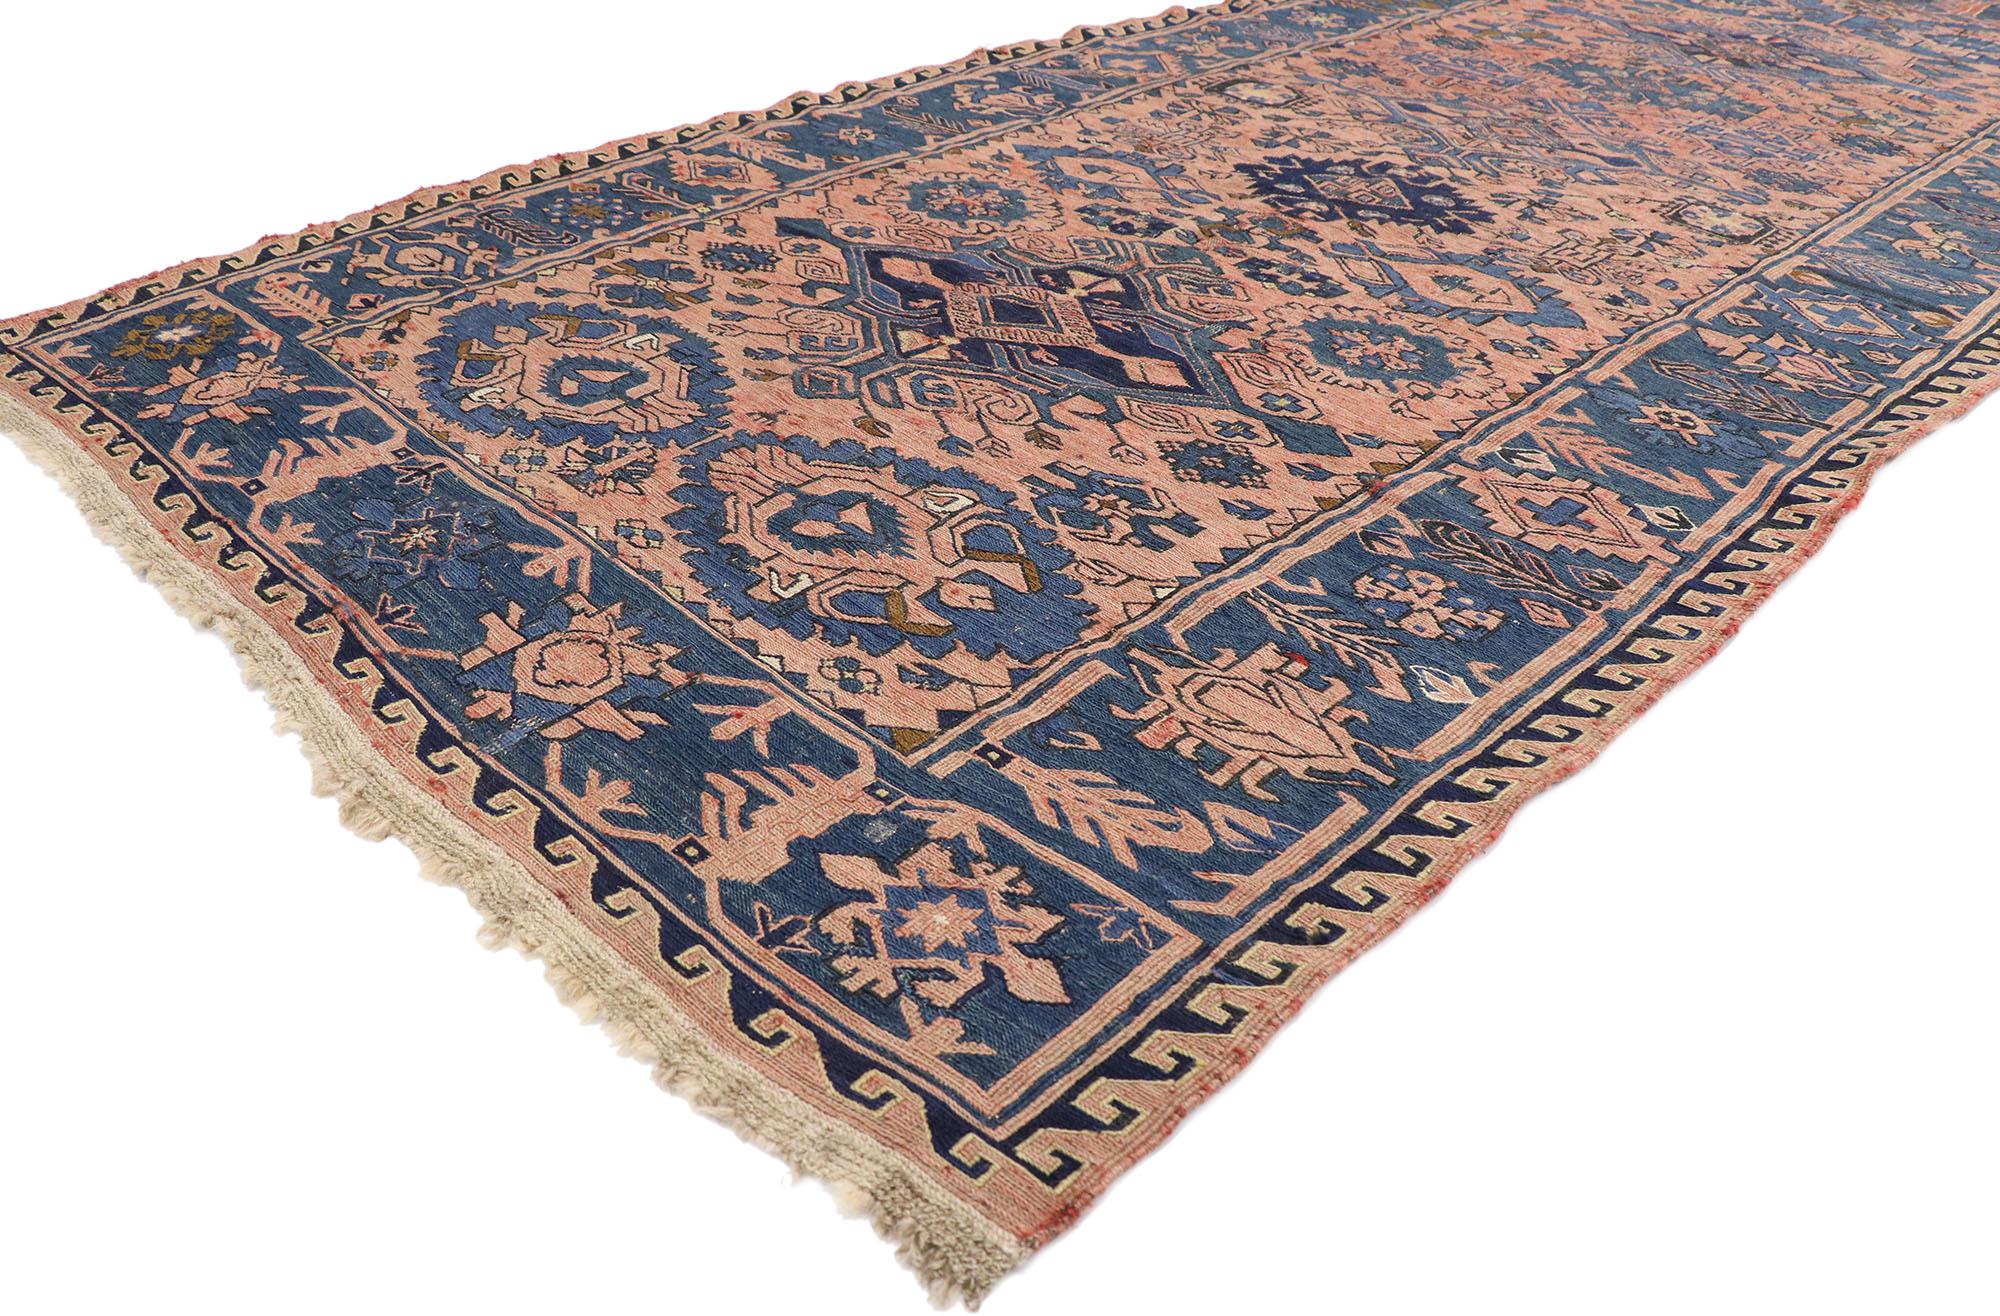 77647 Vintage Persian Soumak rug with Bohemian style 05'00 x 10'10. With its bold expressive design and bohemian style, this hand-knotted wool antique Persian Malayer rug possesses rich cultural attributes representing the beauty of tribal weaving.